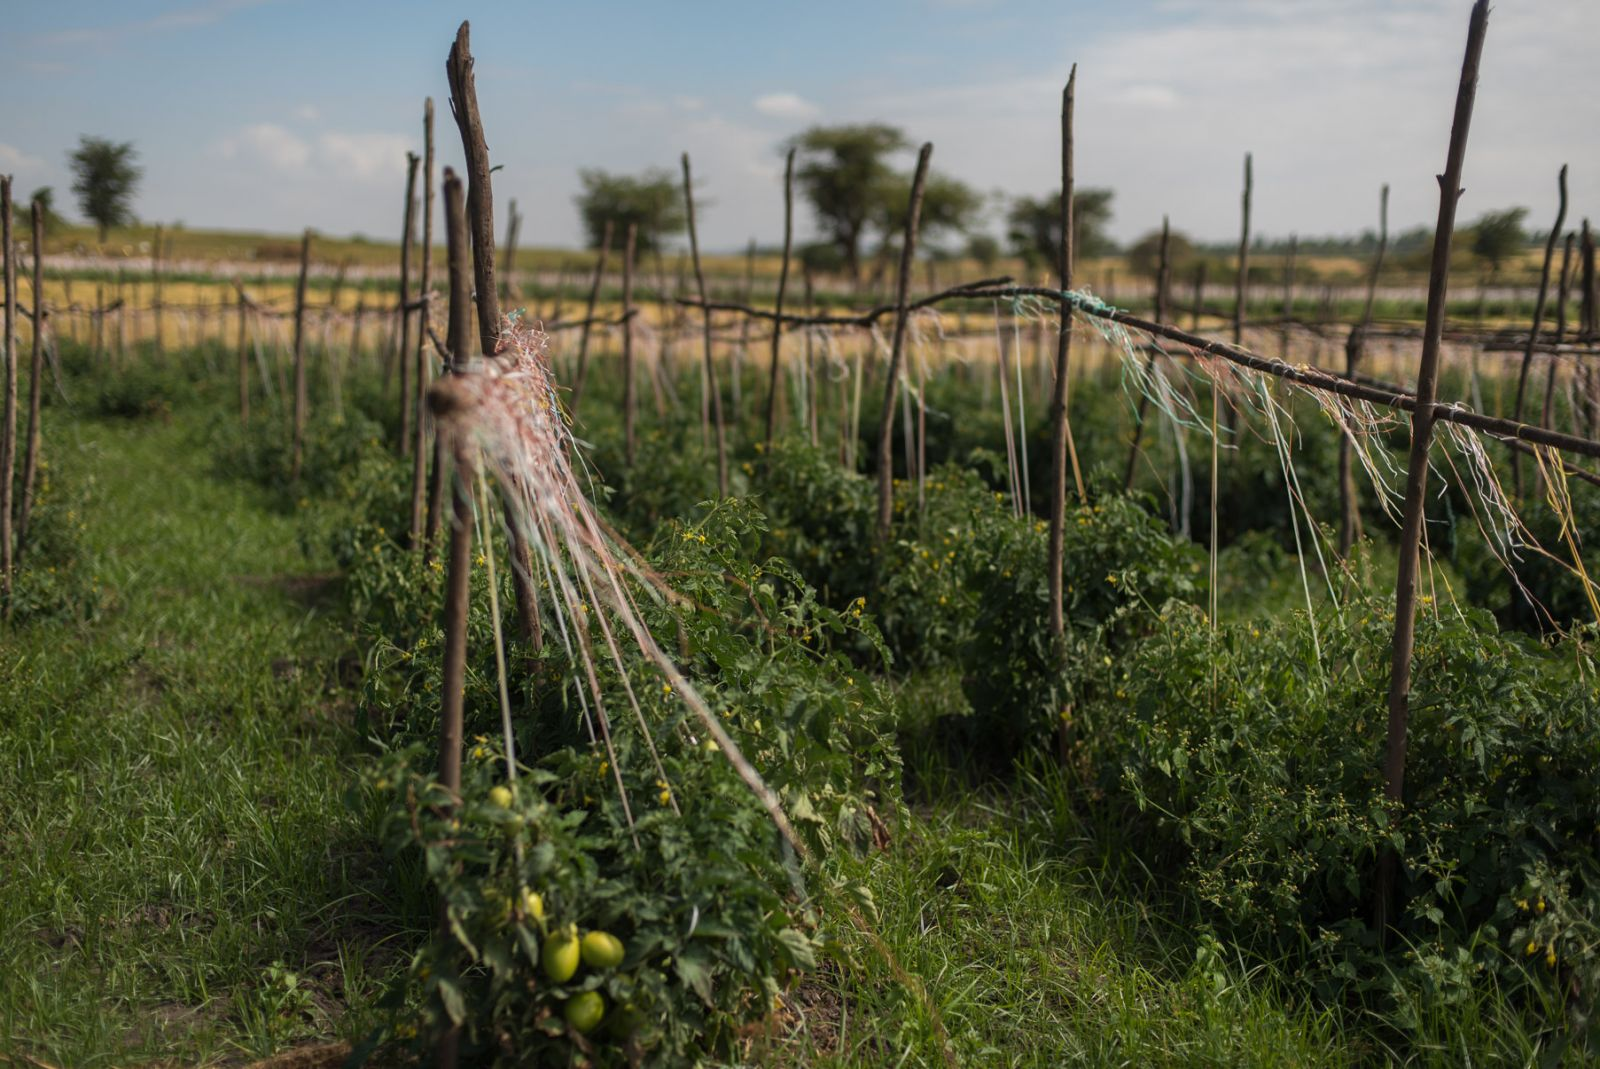 Lush tomato fields in Ethiopia are only possible because of the trees as they amount of shade, help regulate water cycles and improve soil fertility